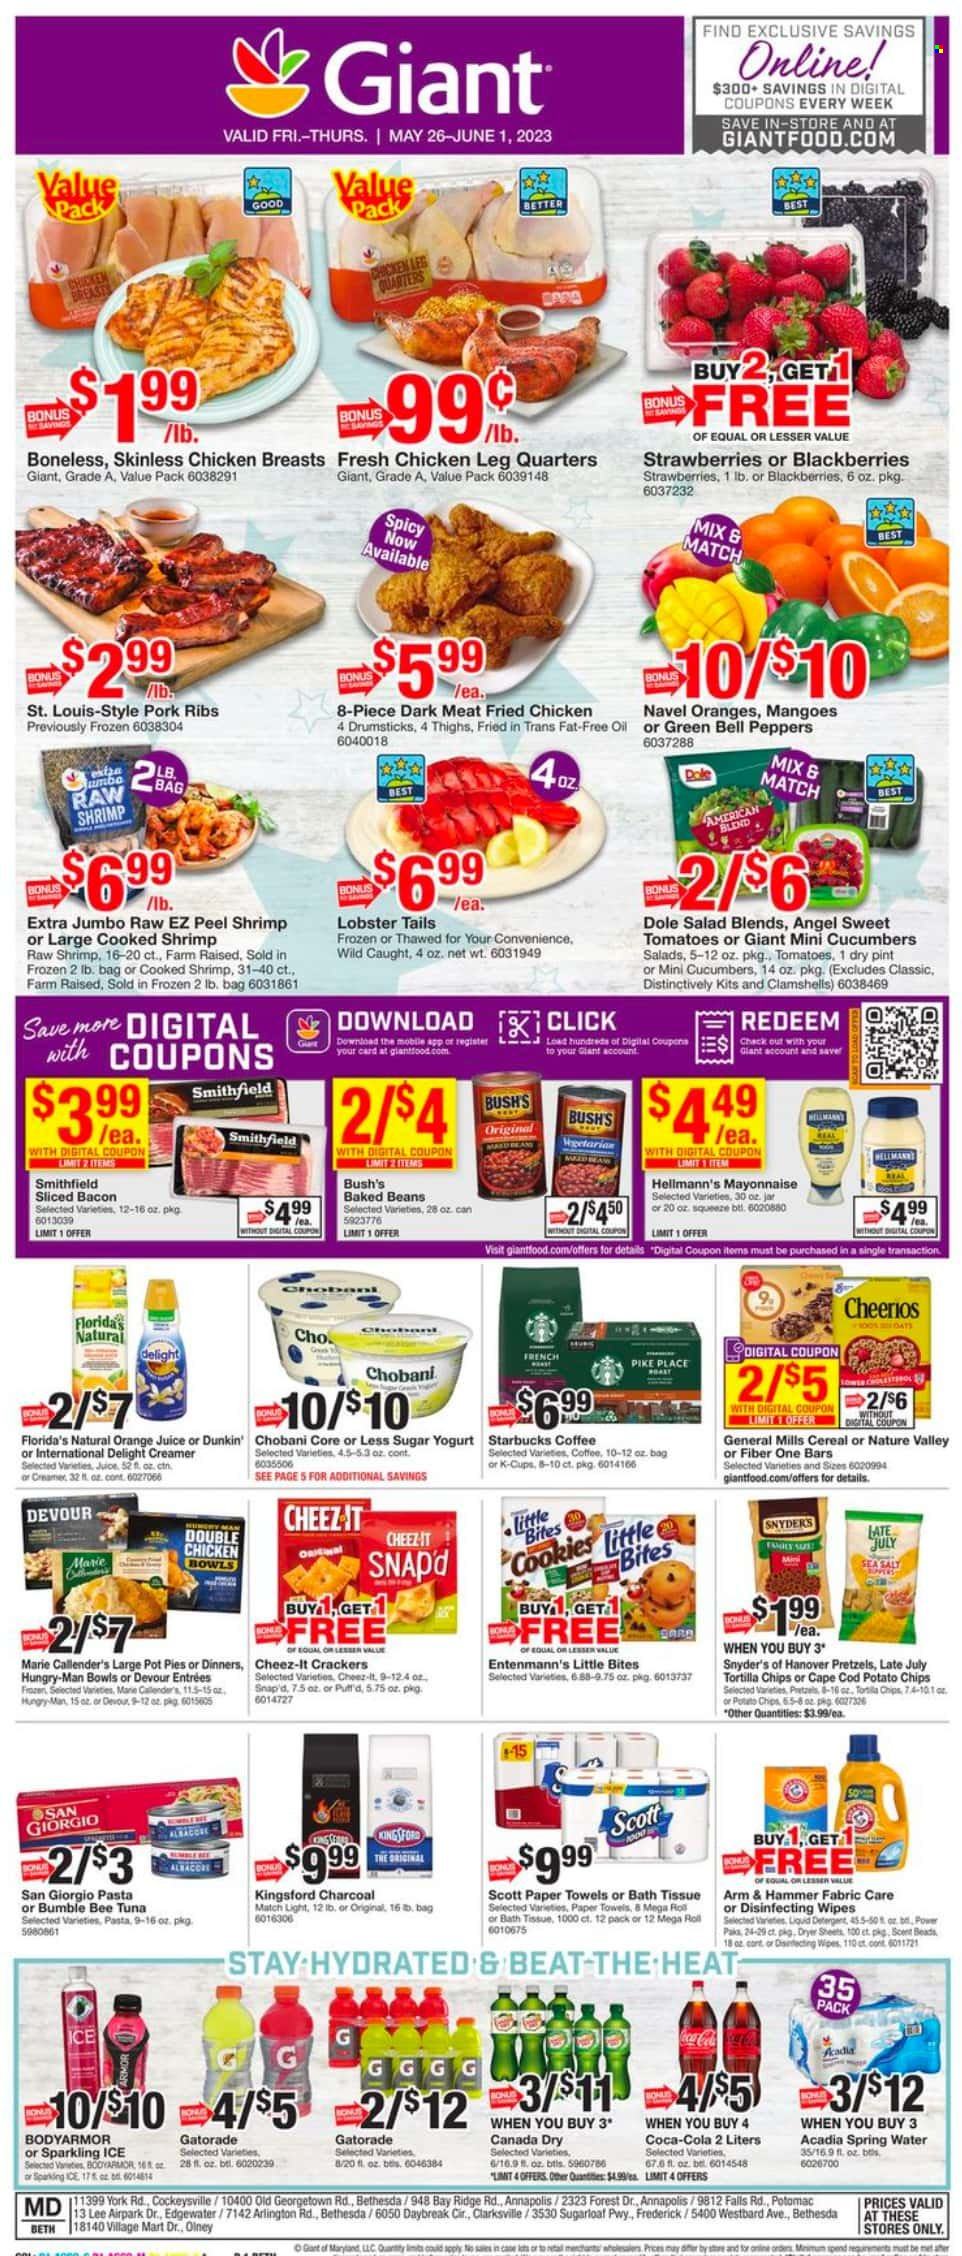 thumbnail - Giant Food Flyer - 05/26/2023 - 06/01/2023 - Sales products - pretzels, pie, pot pie, Entenmann's, bell peppers, salad, Dole, peppers, blackberries, mango, lobster, tuna, lobster tail, shrimps, Bumble Bee, fried chicken, Marie Callender's, Kingsford, yoghurt, Chobani, creamer, mayonnaise, Hellmann’s, Devour, cookies, cereal bar, crackers, Little Bites, Florida's Natural, General Mills, tortilla chips, potato chips, Cheez-It, ARM & HAMMER, baked beans, cereals, Cheerios, Nature Valley, Fiber One, Canada Dry, Coca-Cola, orange juice, juice, soft drink, Gatorade, spring water, flavored water, Acadia, water, coffee, Starbucks, coffee capsules, K-Cups, chicken breasts, chicken legs, ribs, pork meat, pork ribs, cleansing wipes, wipes, bath tissue, Scott, kitchen towels, paper towels, detergent, liquid detergent, dryer sheets, electrolyte drink, navel oranges. Page 3.